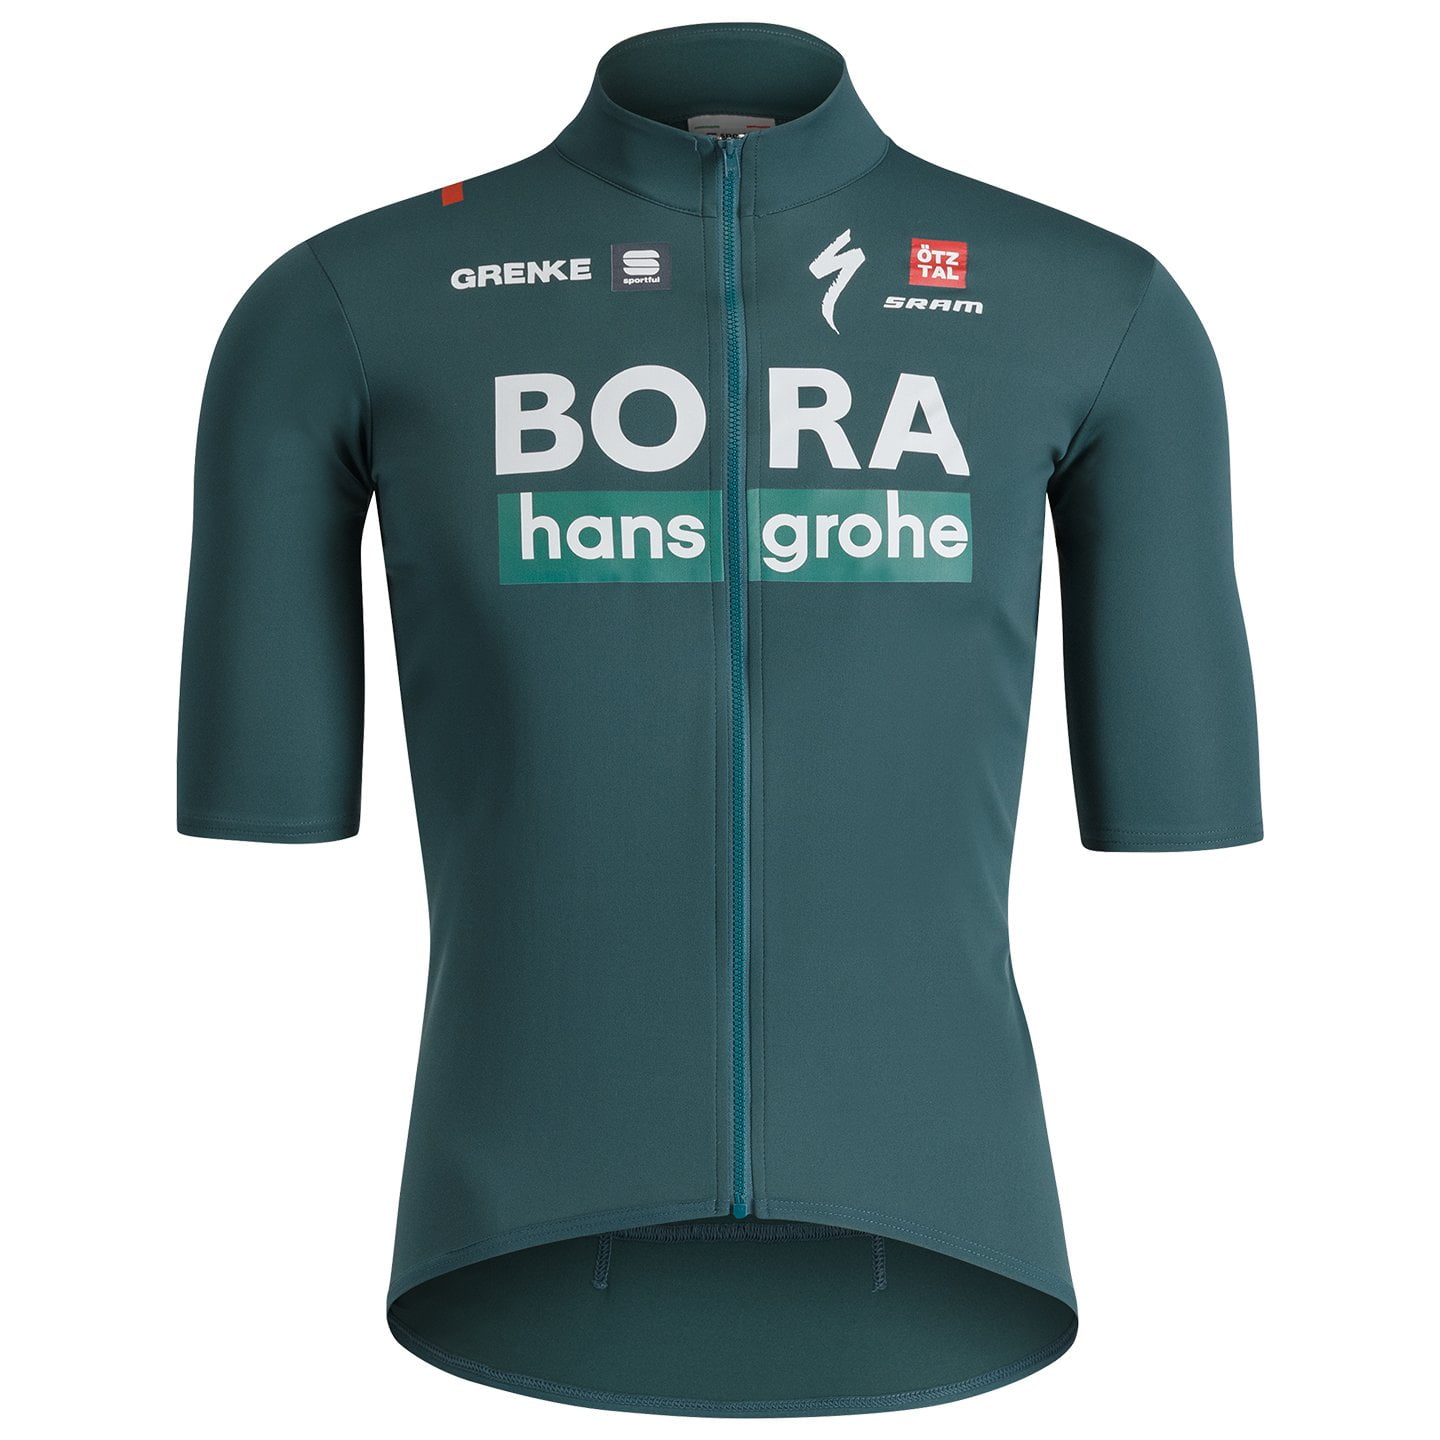 BORA-hansgrohe Short Sleeve Light Jacket 2024, for men, size S, Cycling jersey, Cycling clothing